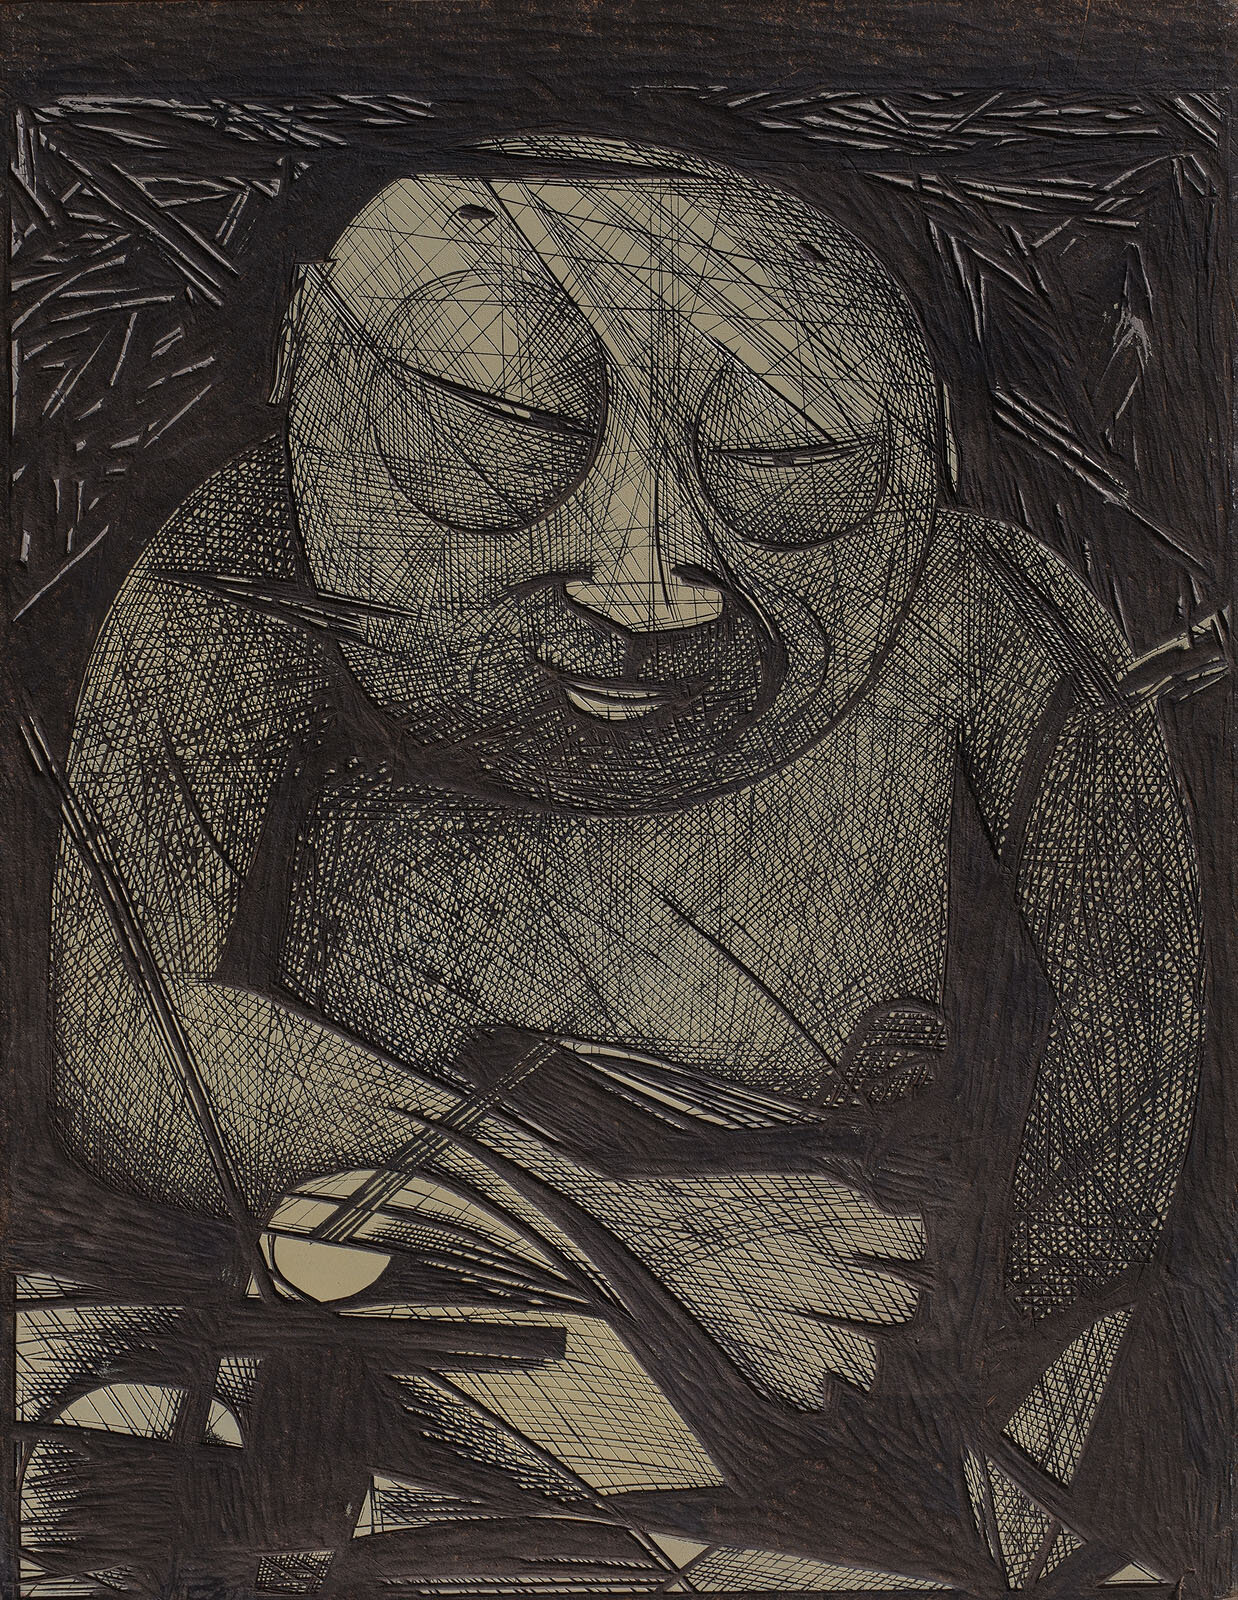 The original woodblock from the “Human Buddha” single edition of 26 prints